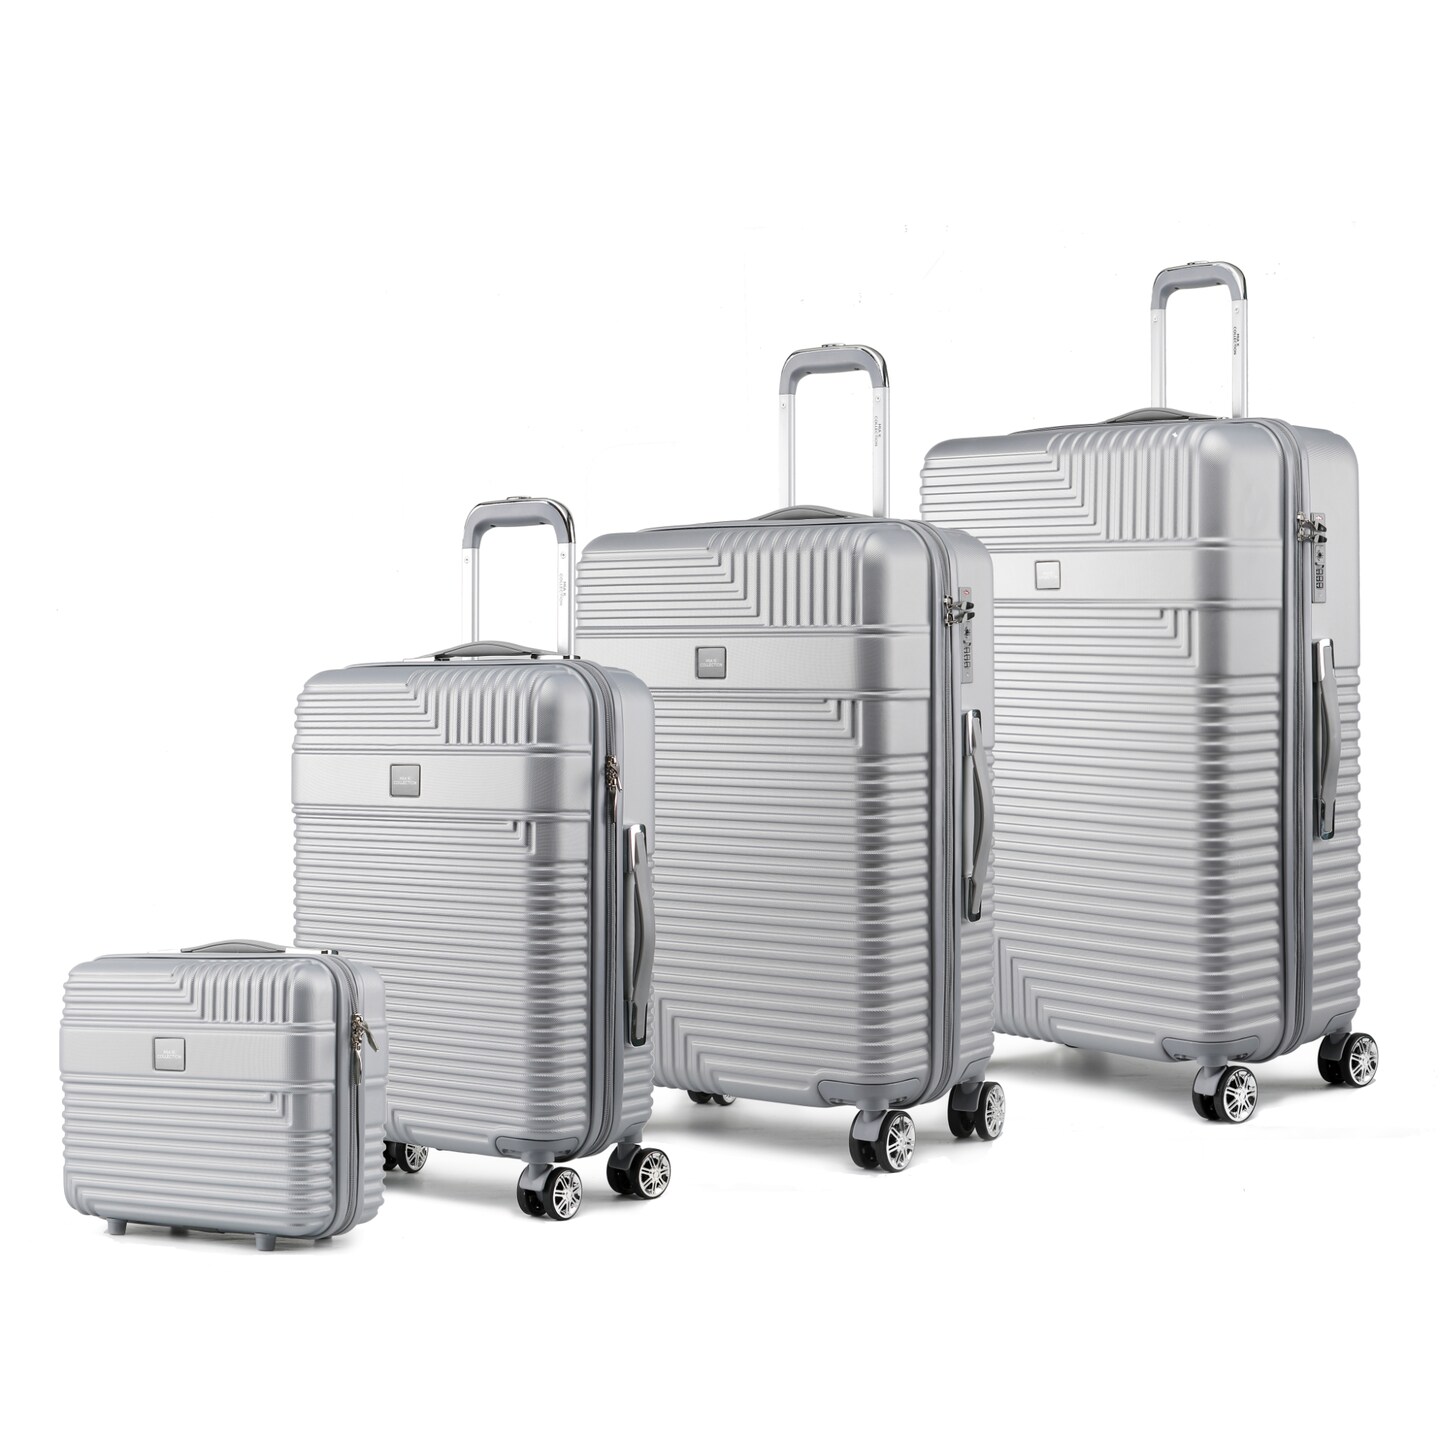 MKF Collection by Mia K - Women&#x27;s Mykonos Luggage Set- Extra Large Check-in, Large Check-in, Medium Carry-on, and Small Cosmetic Case